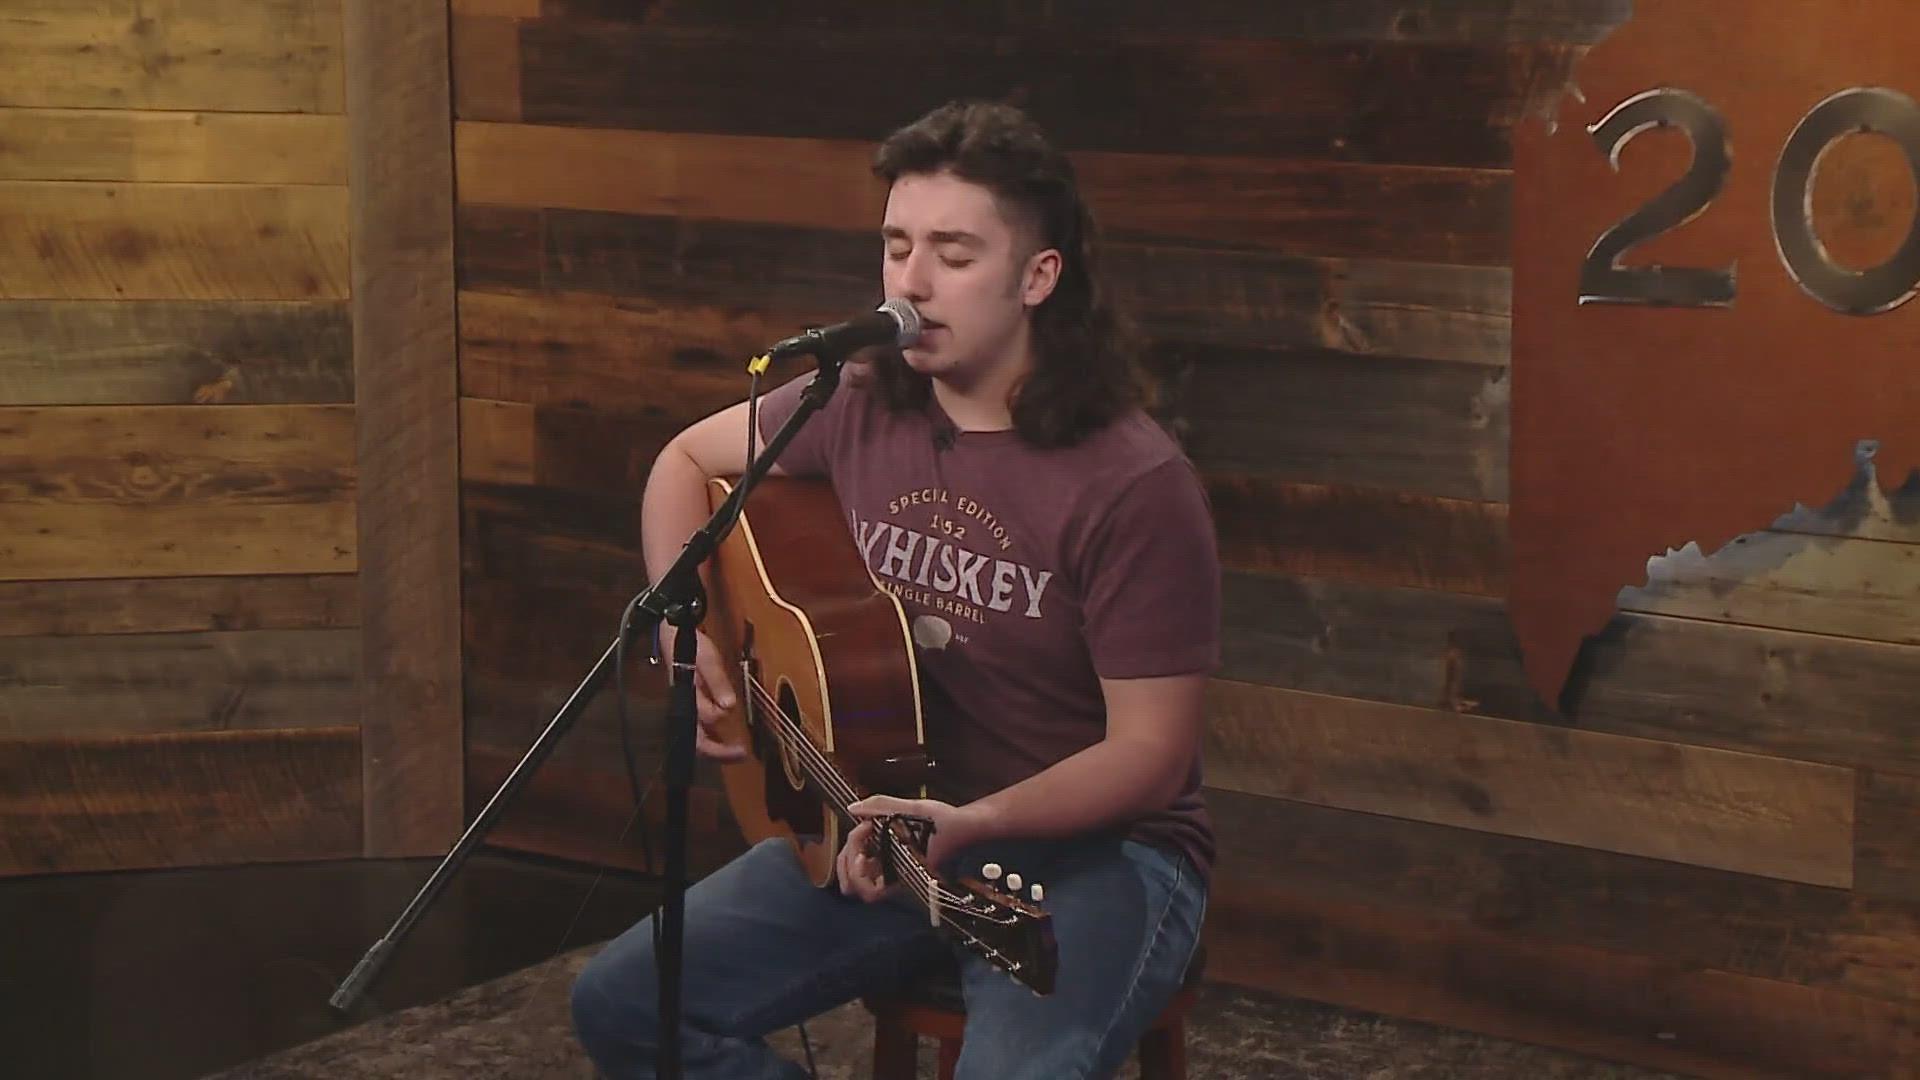 The 19-year-old has already performed live throughout New England and Nashville.